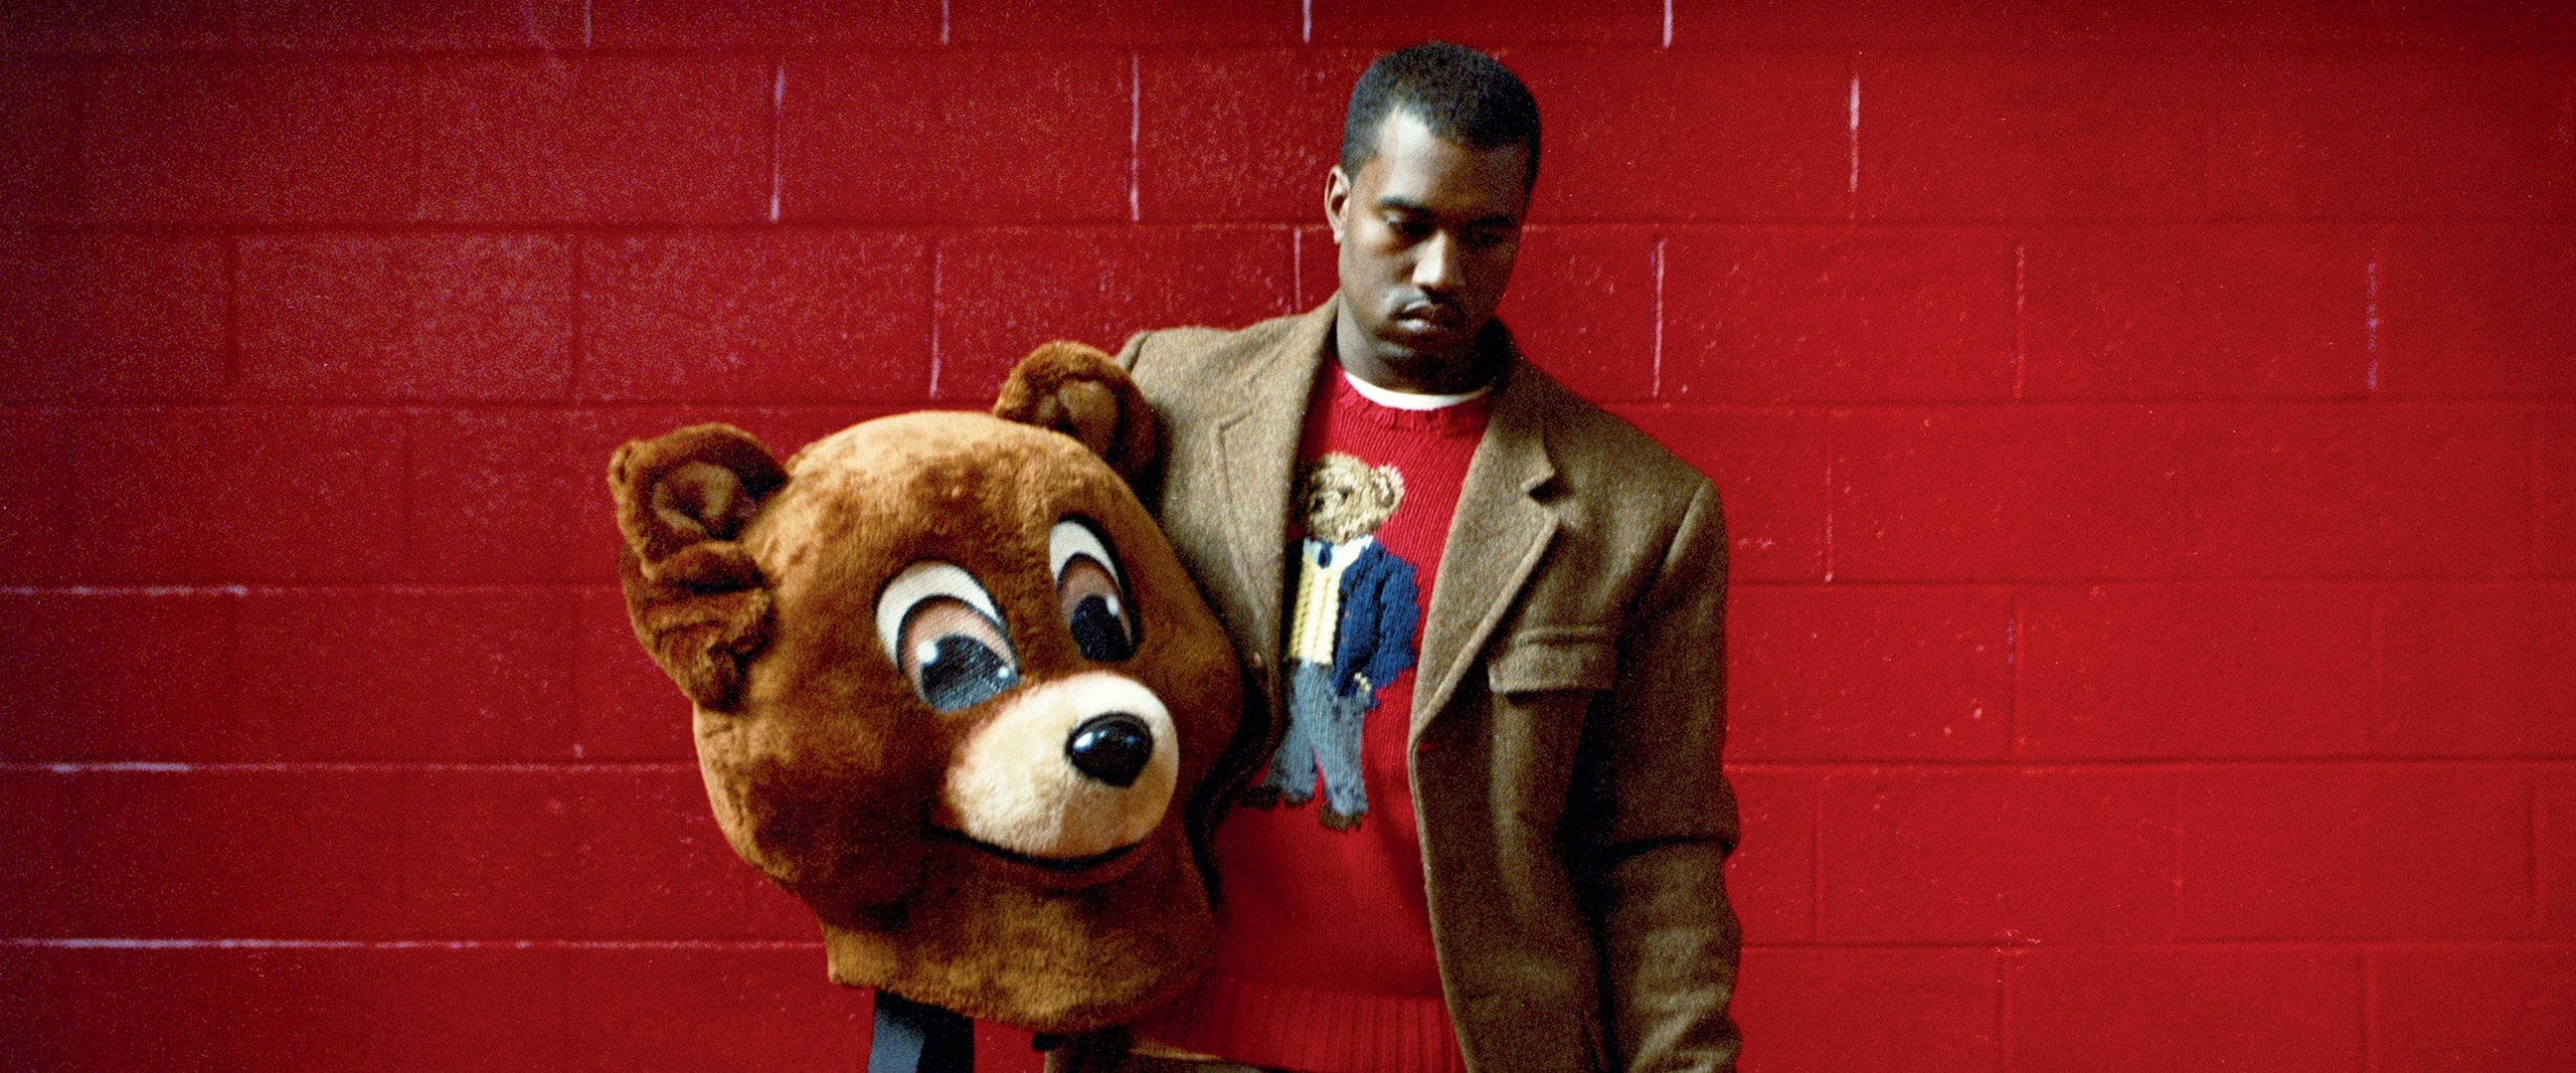 the college dropout cover